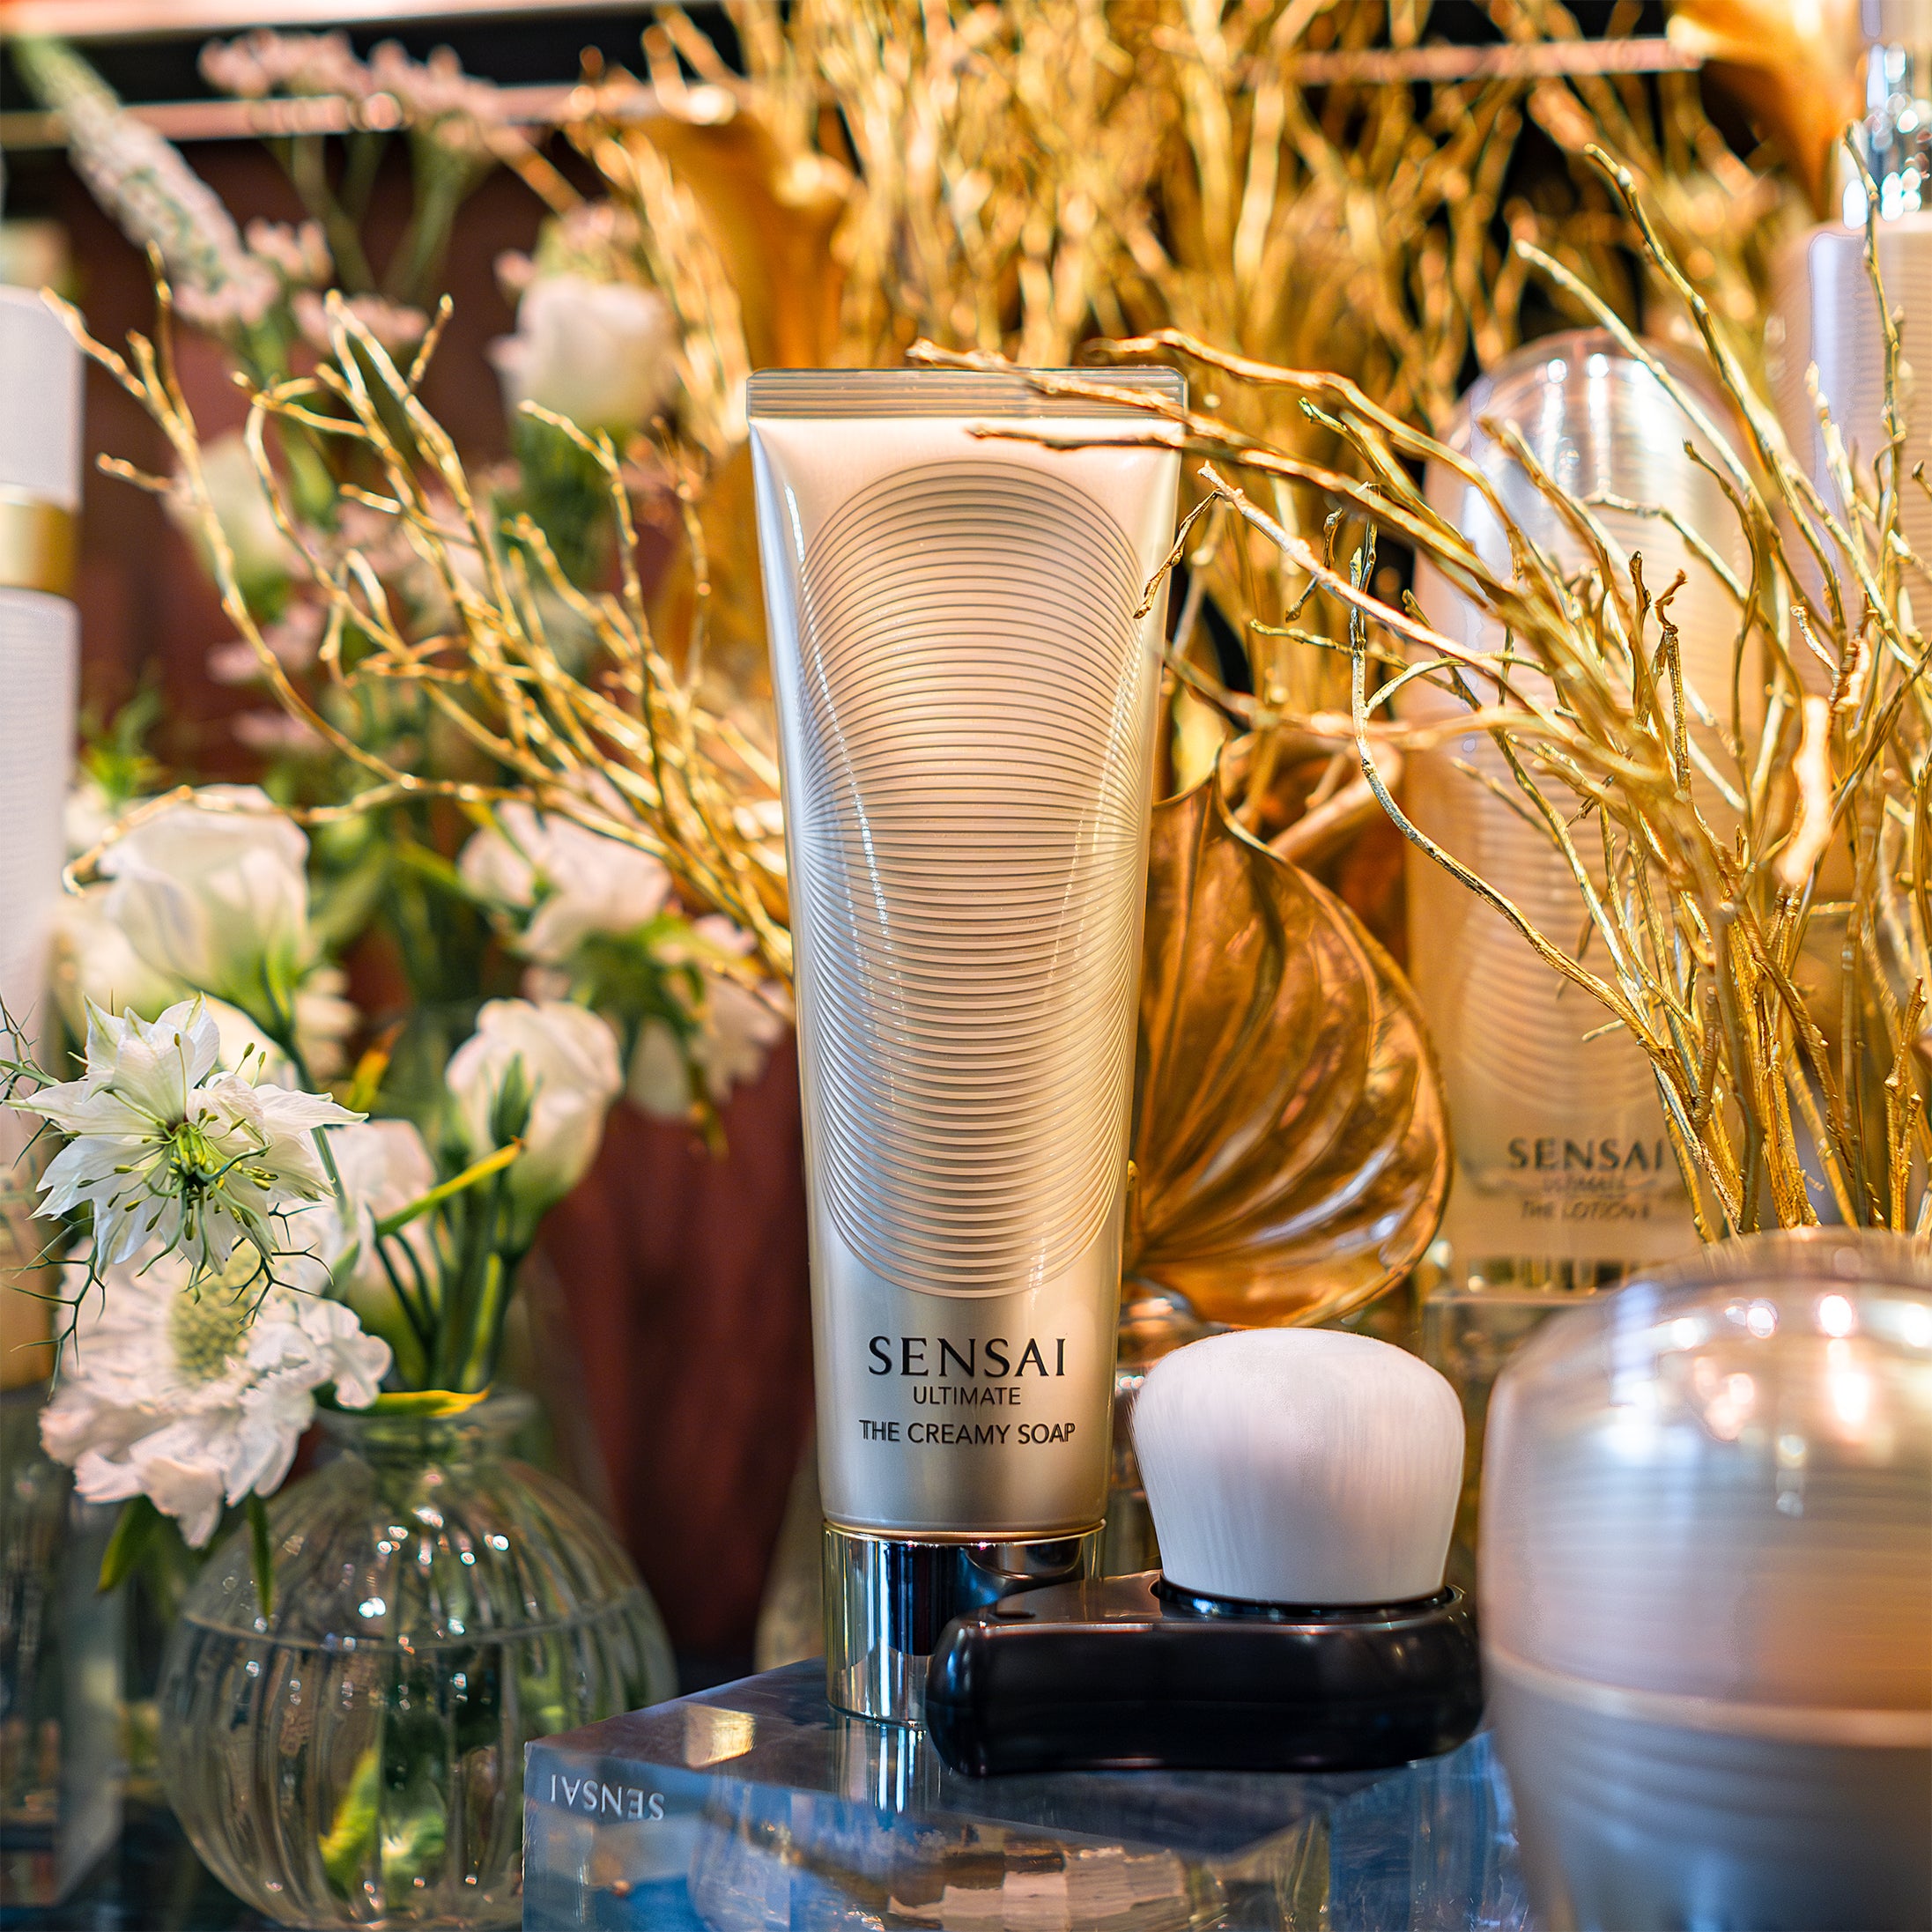 Sensai Ultimate The Creamy Soap is beautifully presented amidst golden flower arrangements by event florist Amarante London, adding luxury and sophistication to the Sensai product launch in London.